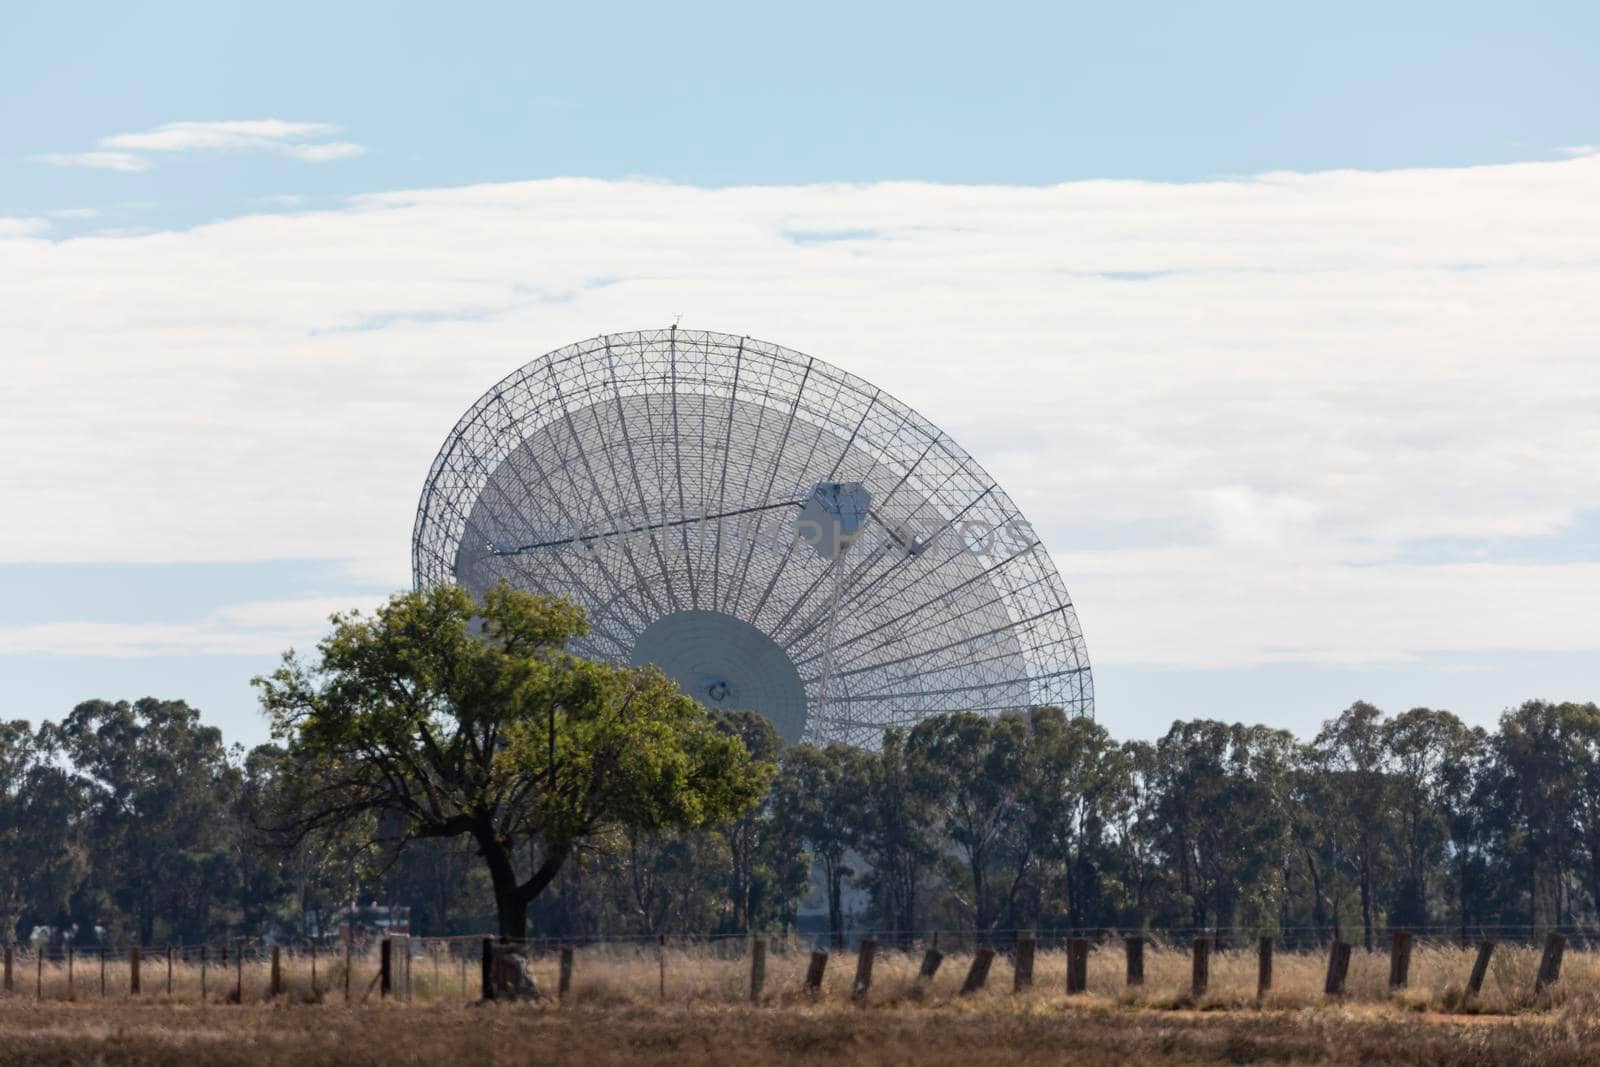 A large outdoor scientific radio telescope by WittkePhotos